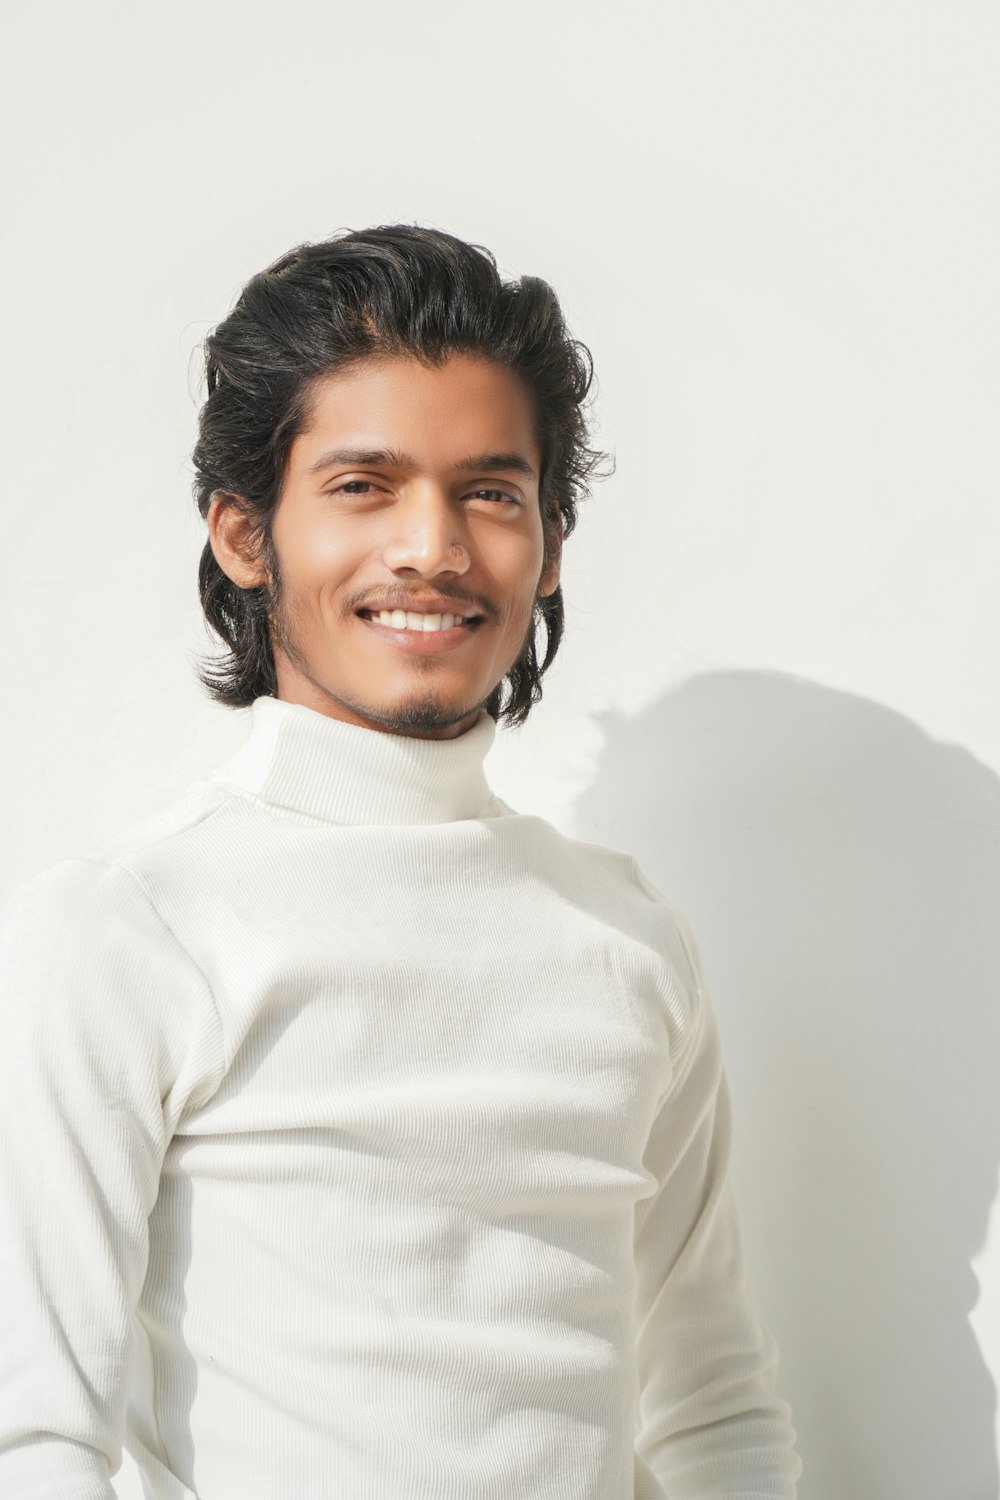 a man in a white shirt smiling for the camera